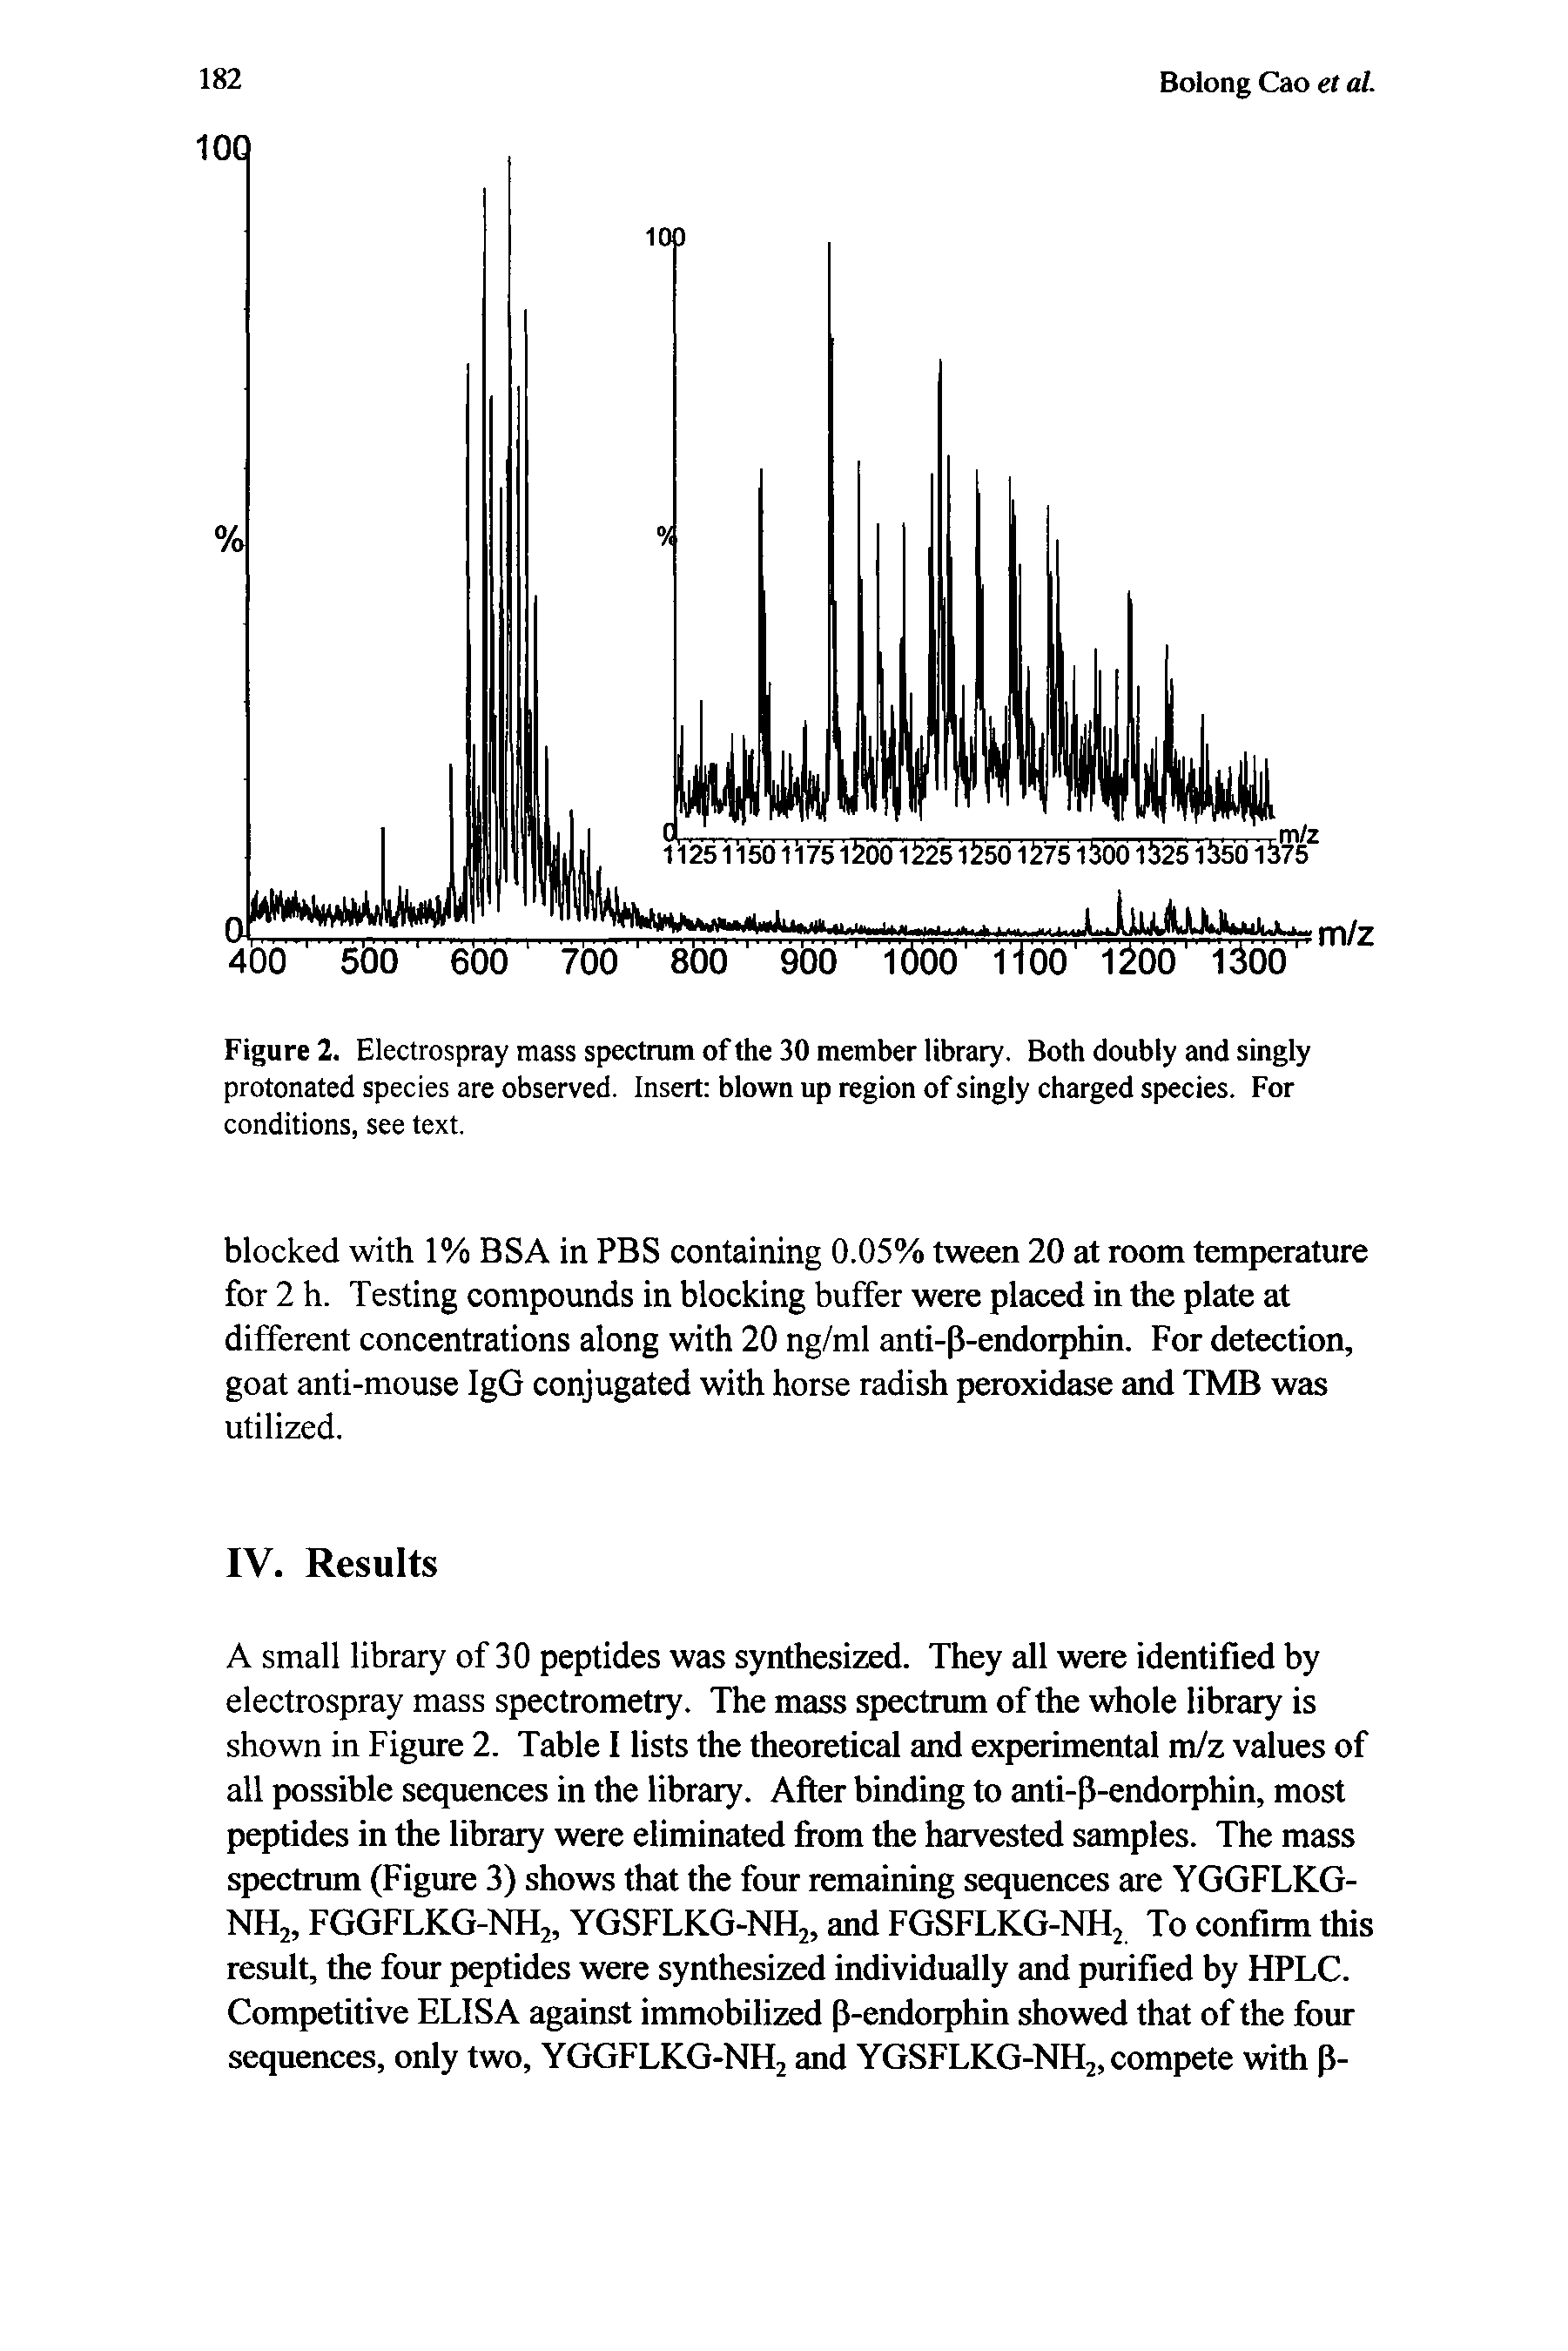 Figure 2. Electrospray mass spectrum of the 30 member library. Both doubly and singly protonated species are observed. Insert blown up region of singly charged species. For conditions, see text.